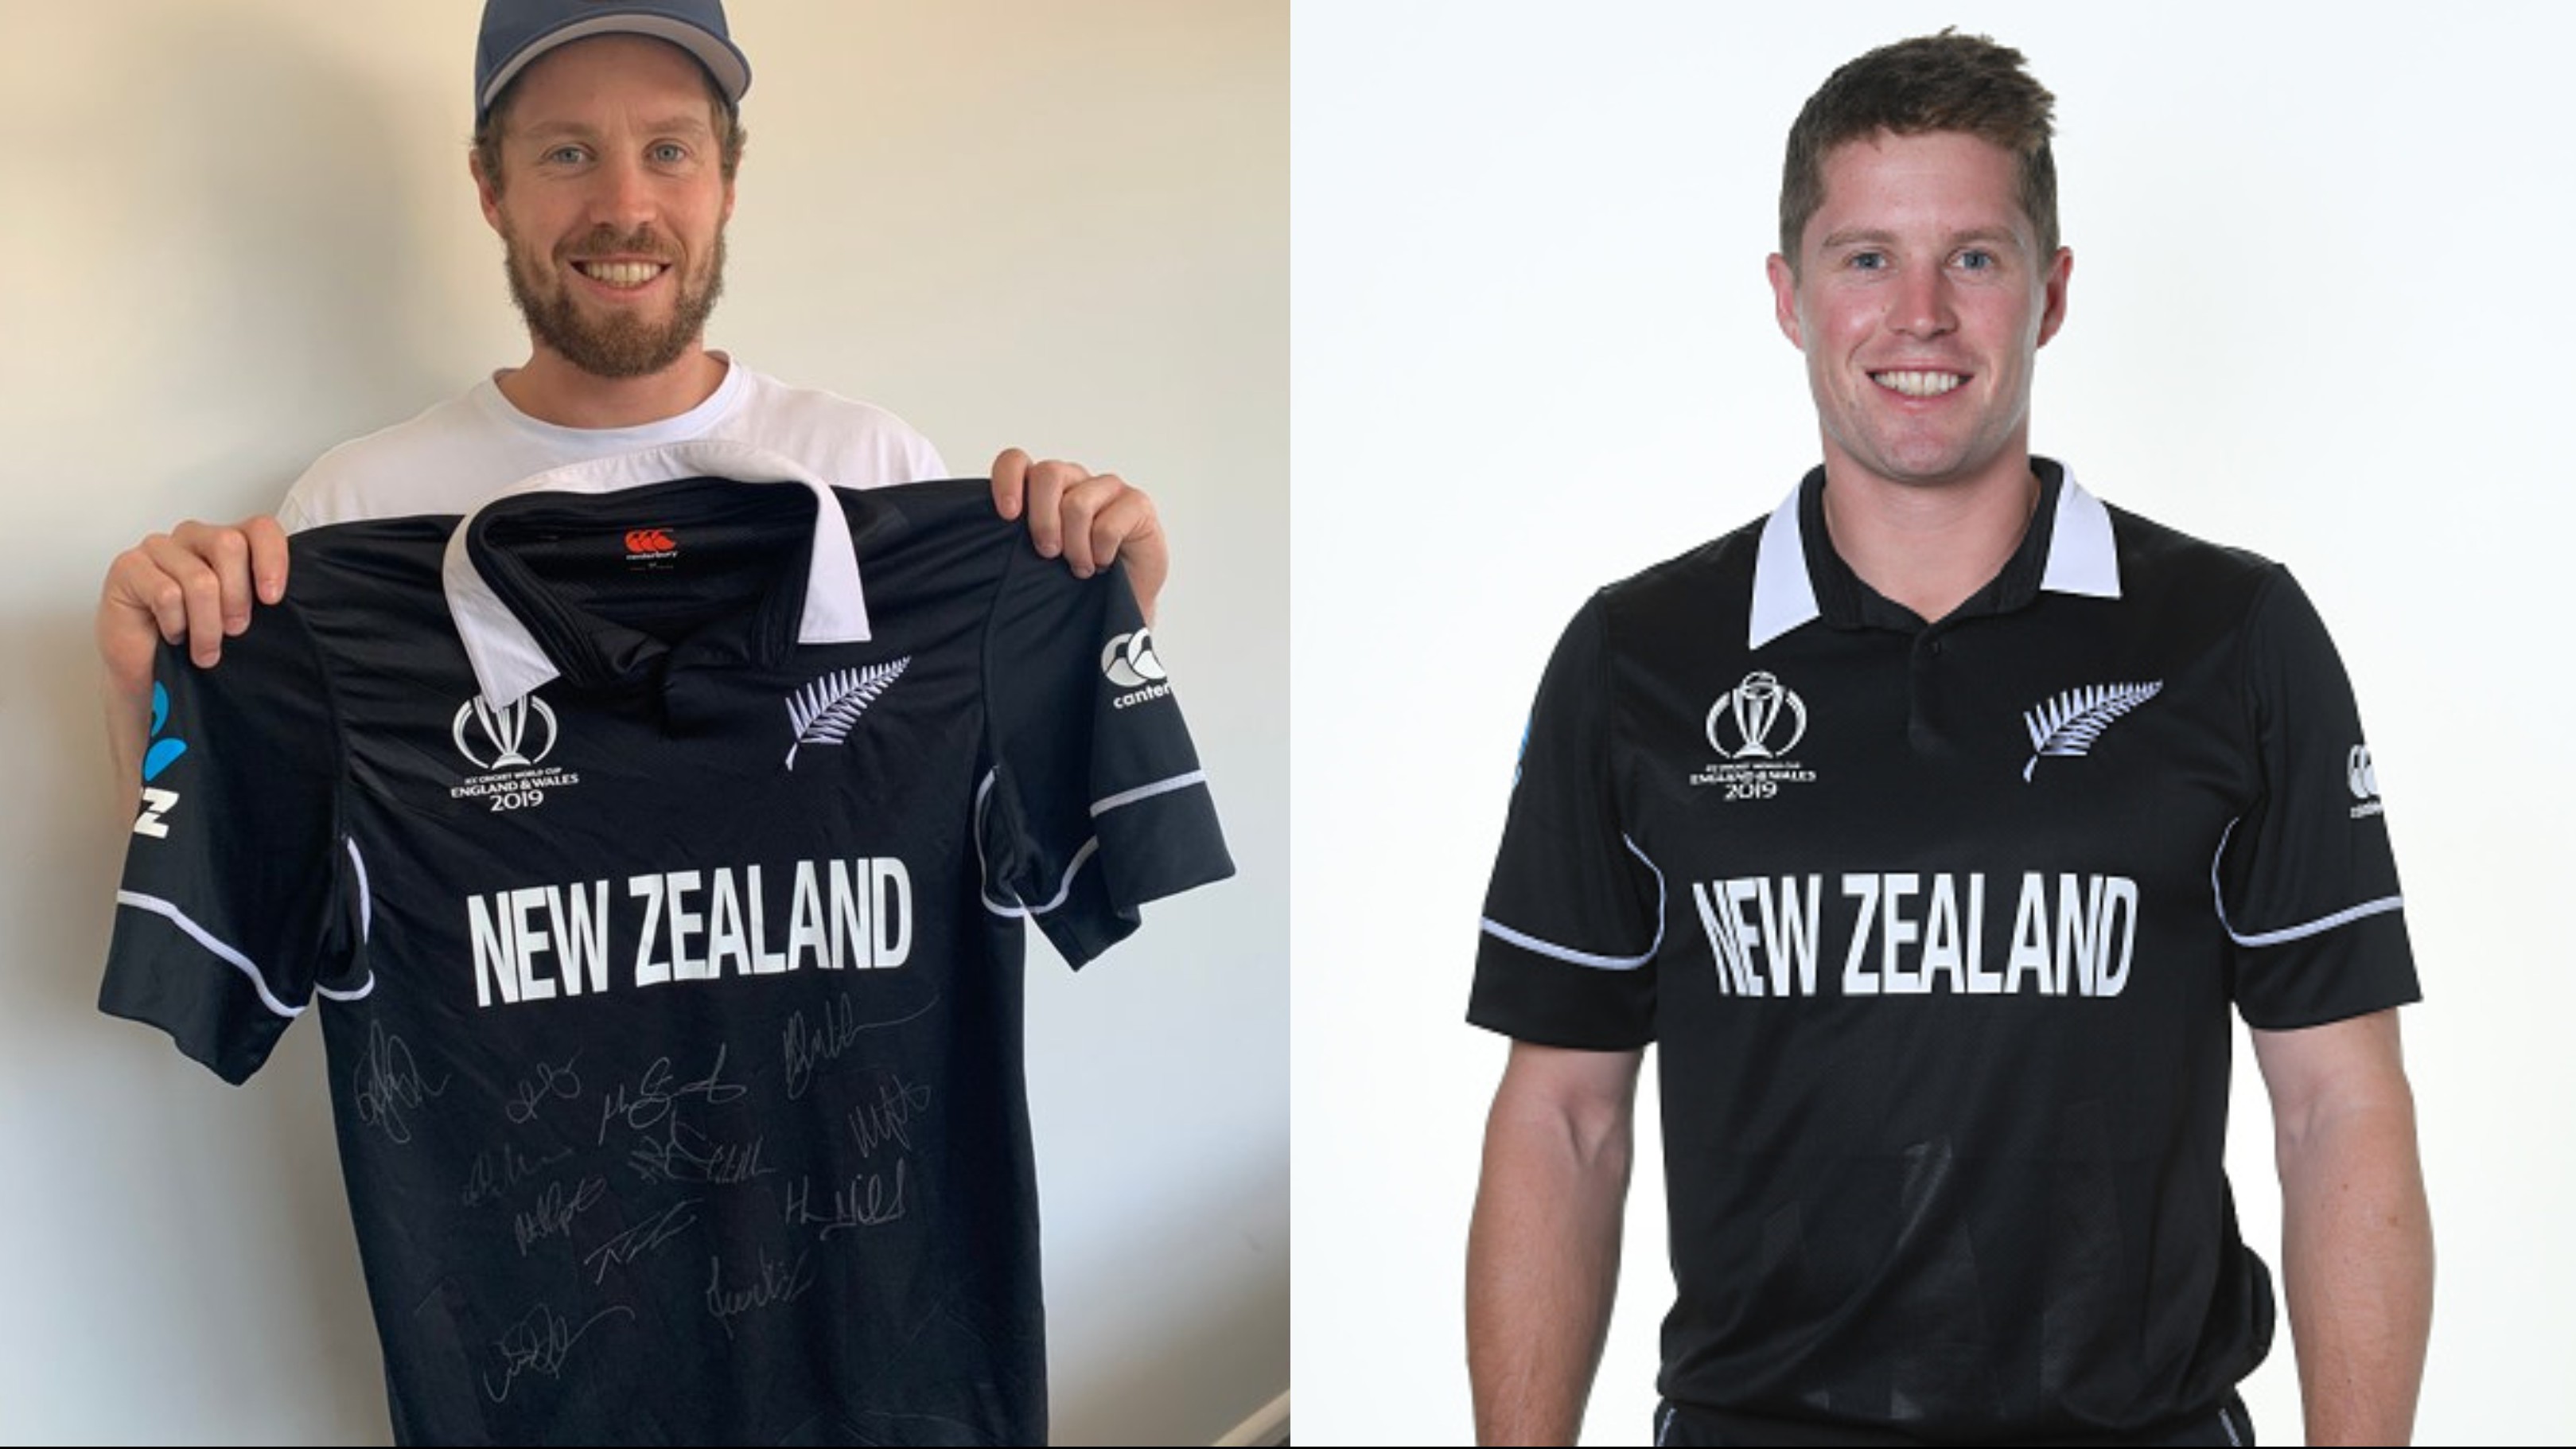 Henry Nicholls donates his World Cup 2019 final jersey to UNICEF in fight against COVID-19